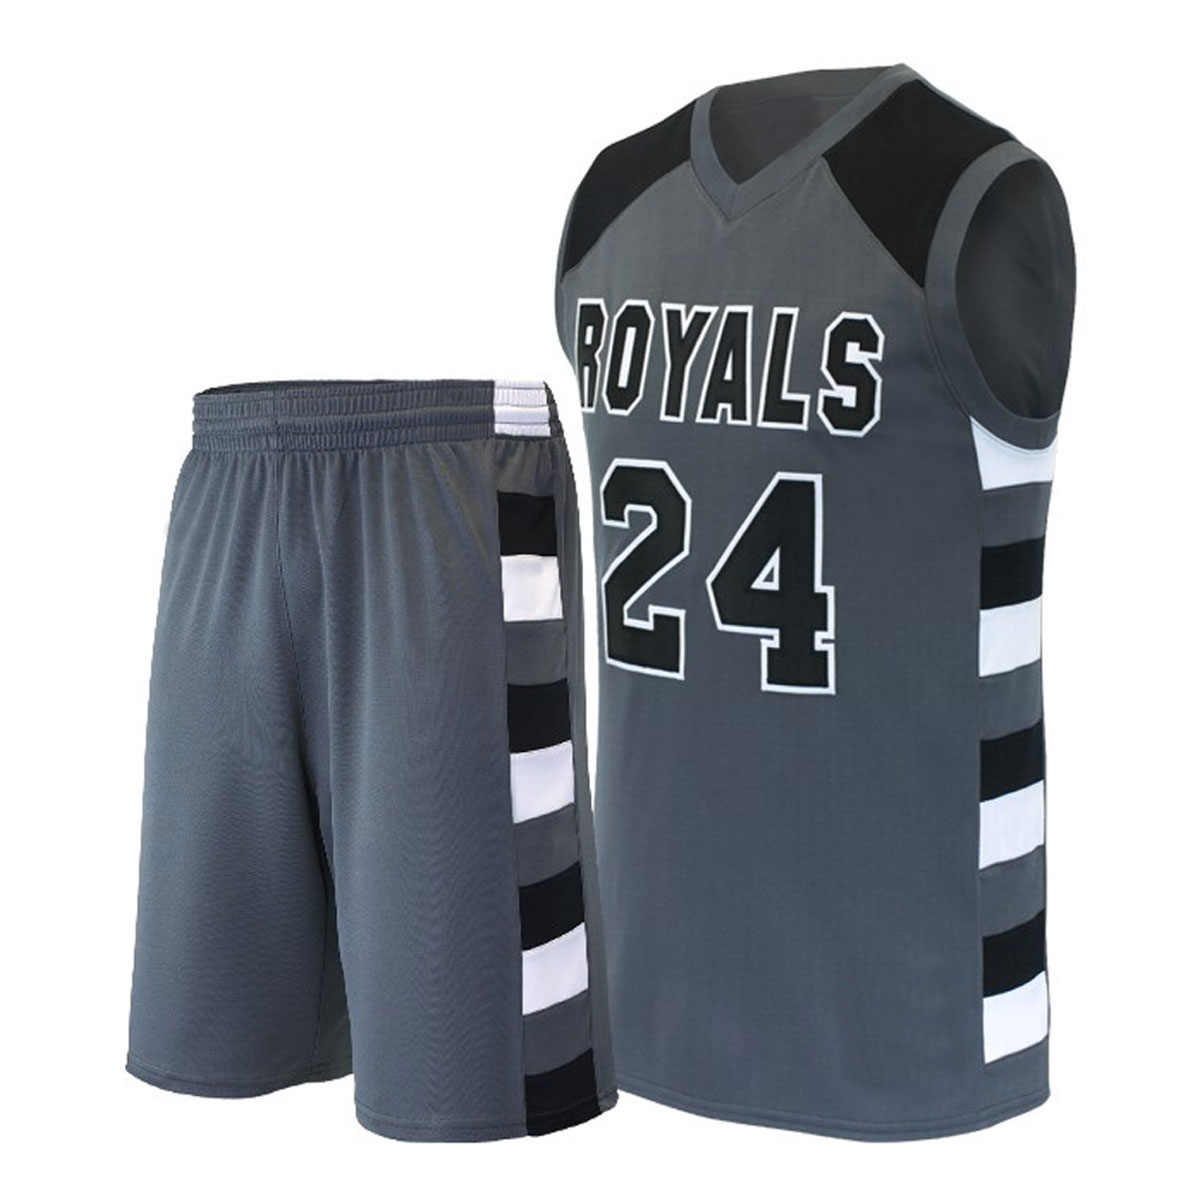 Detailed view of our basketball apparel, highlighting design elements and top-notch craftsmanship.